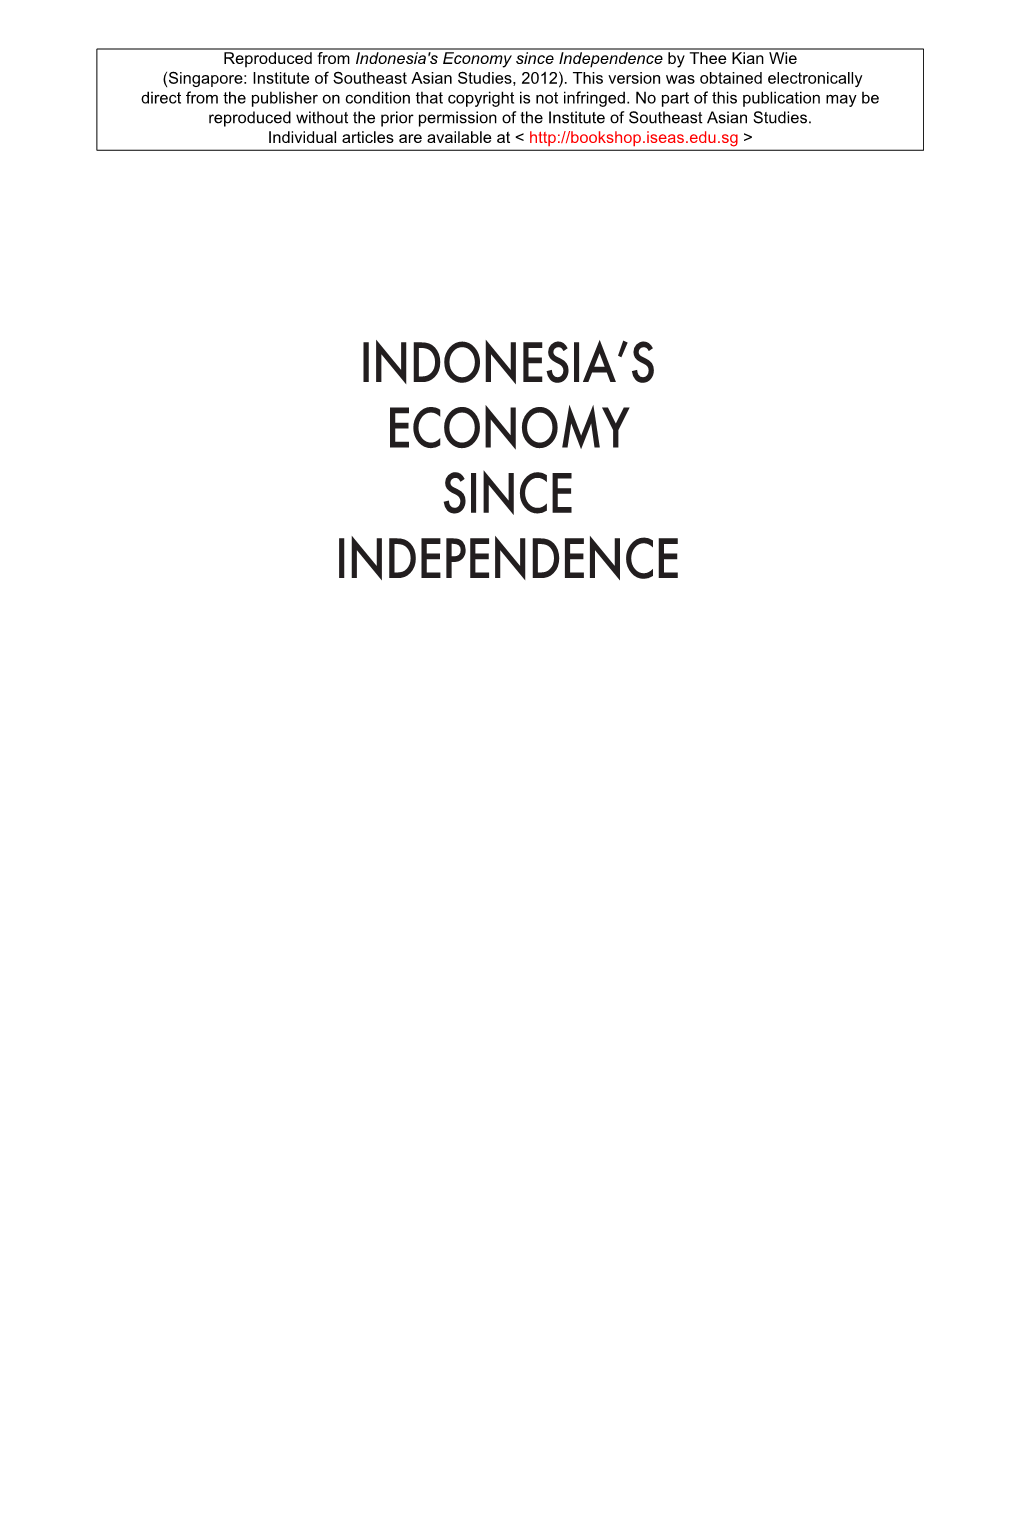 Indonesia's Economy Since Independence